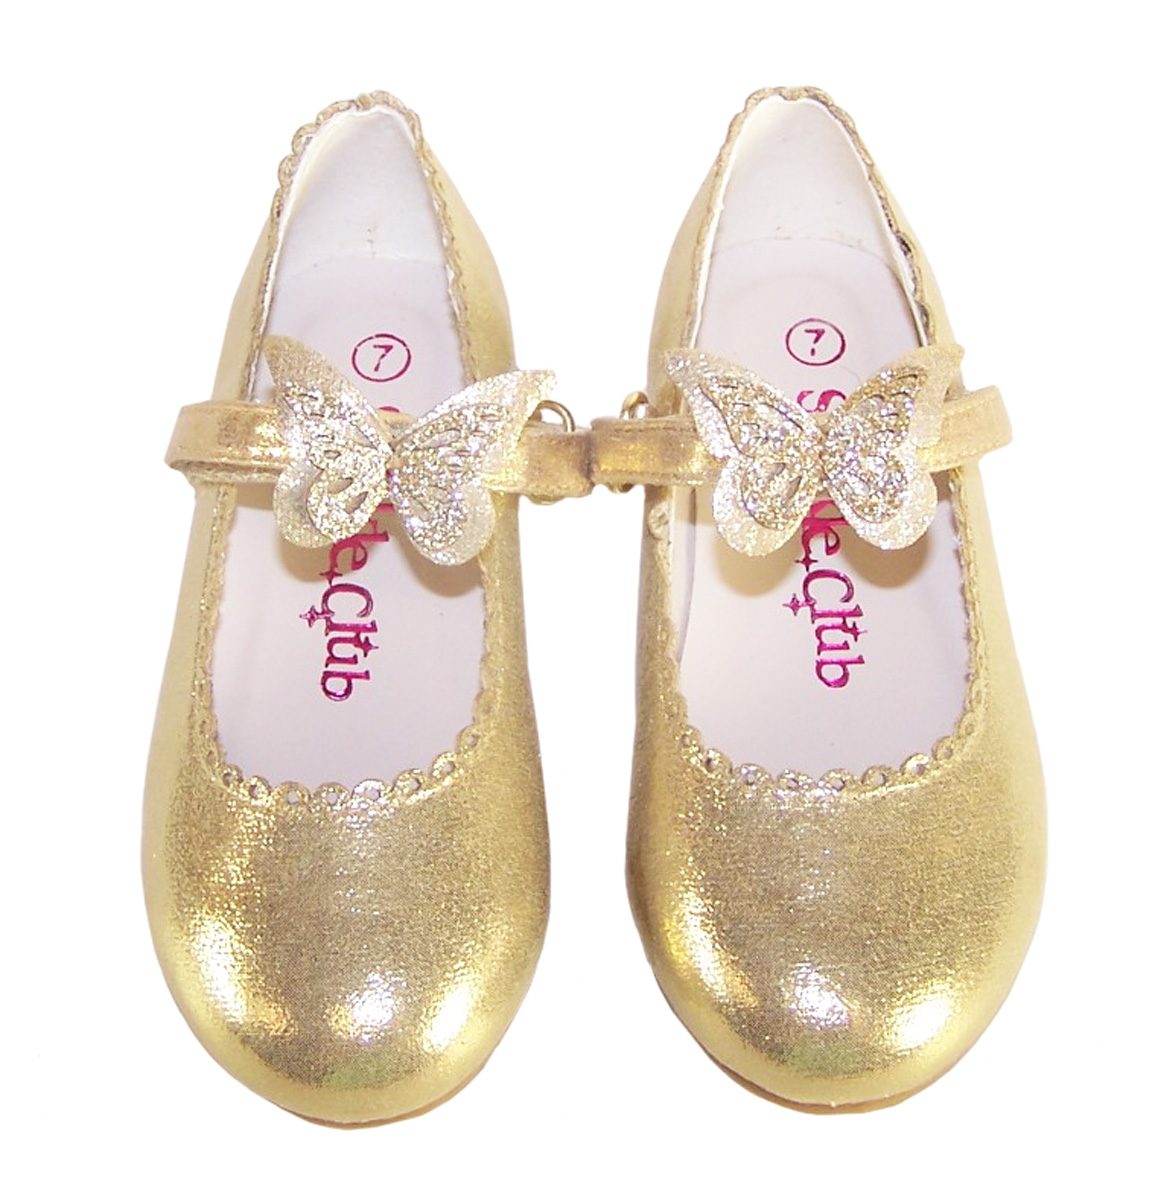 Girls gold shimmer ballerina party shoes-5847